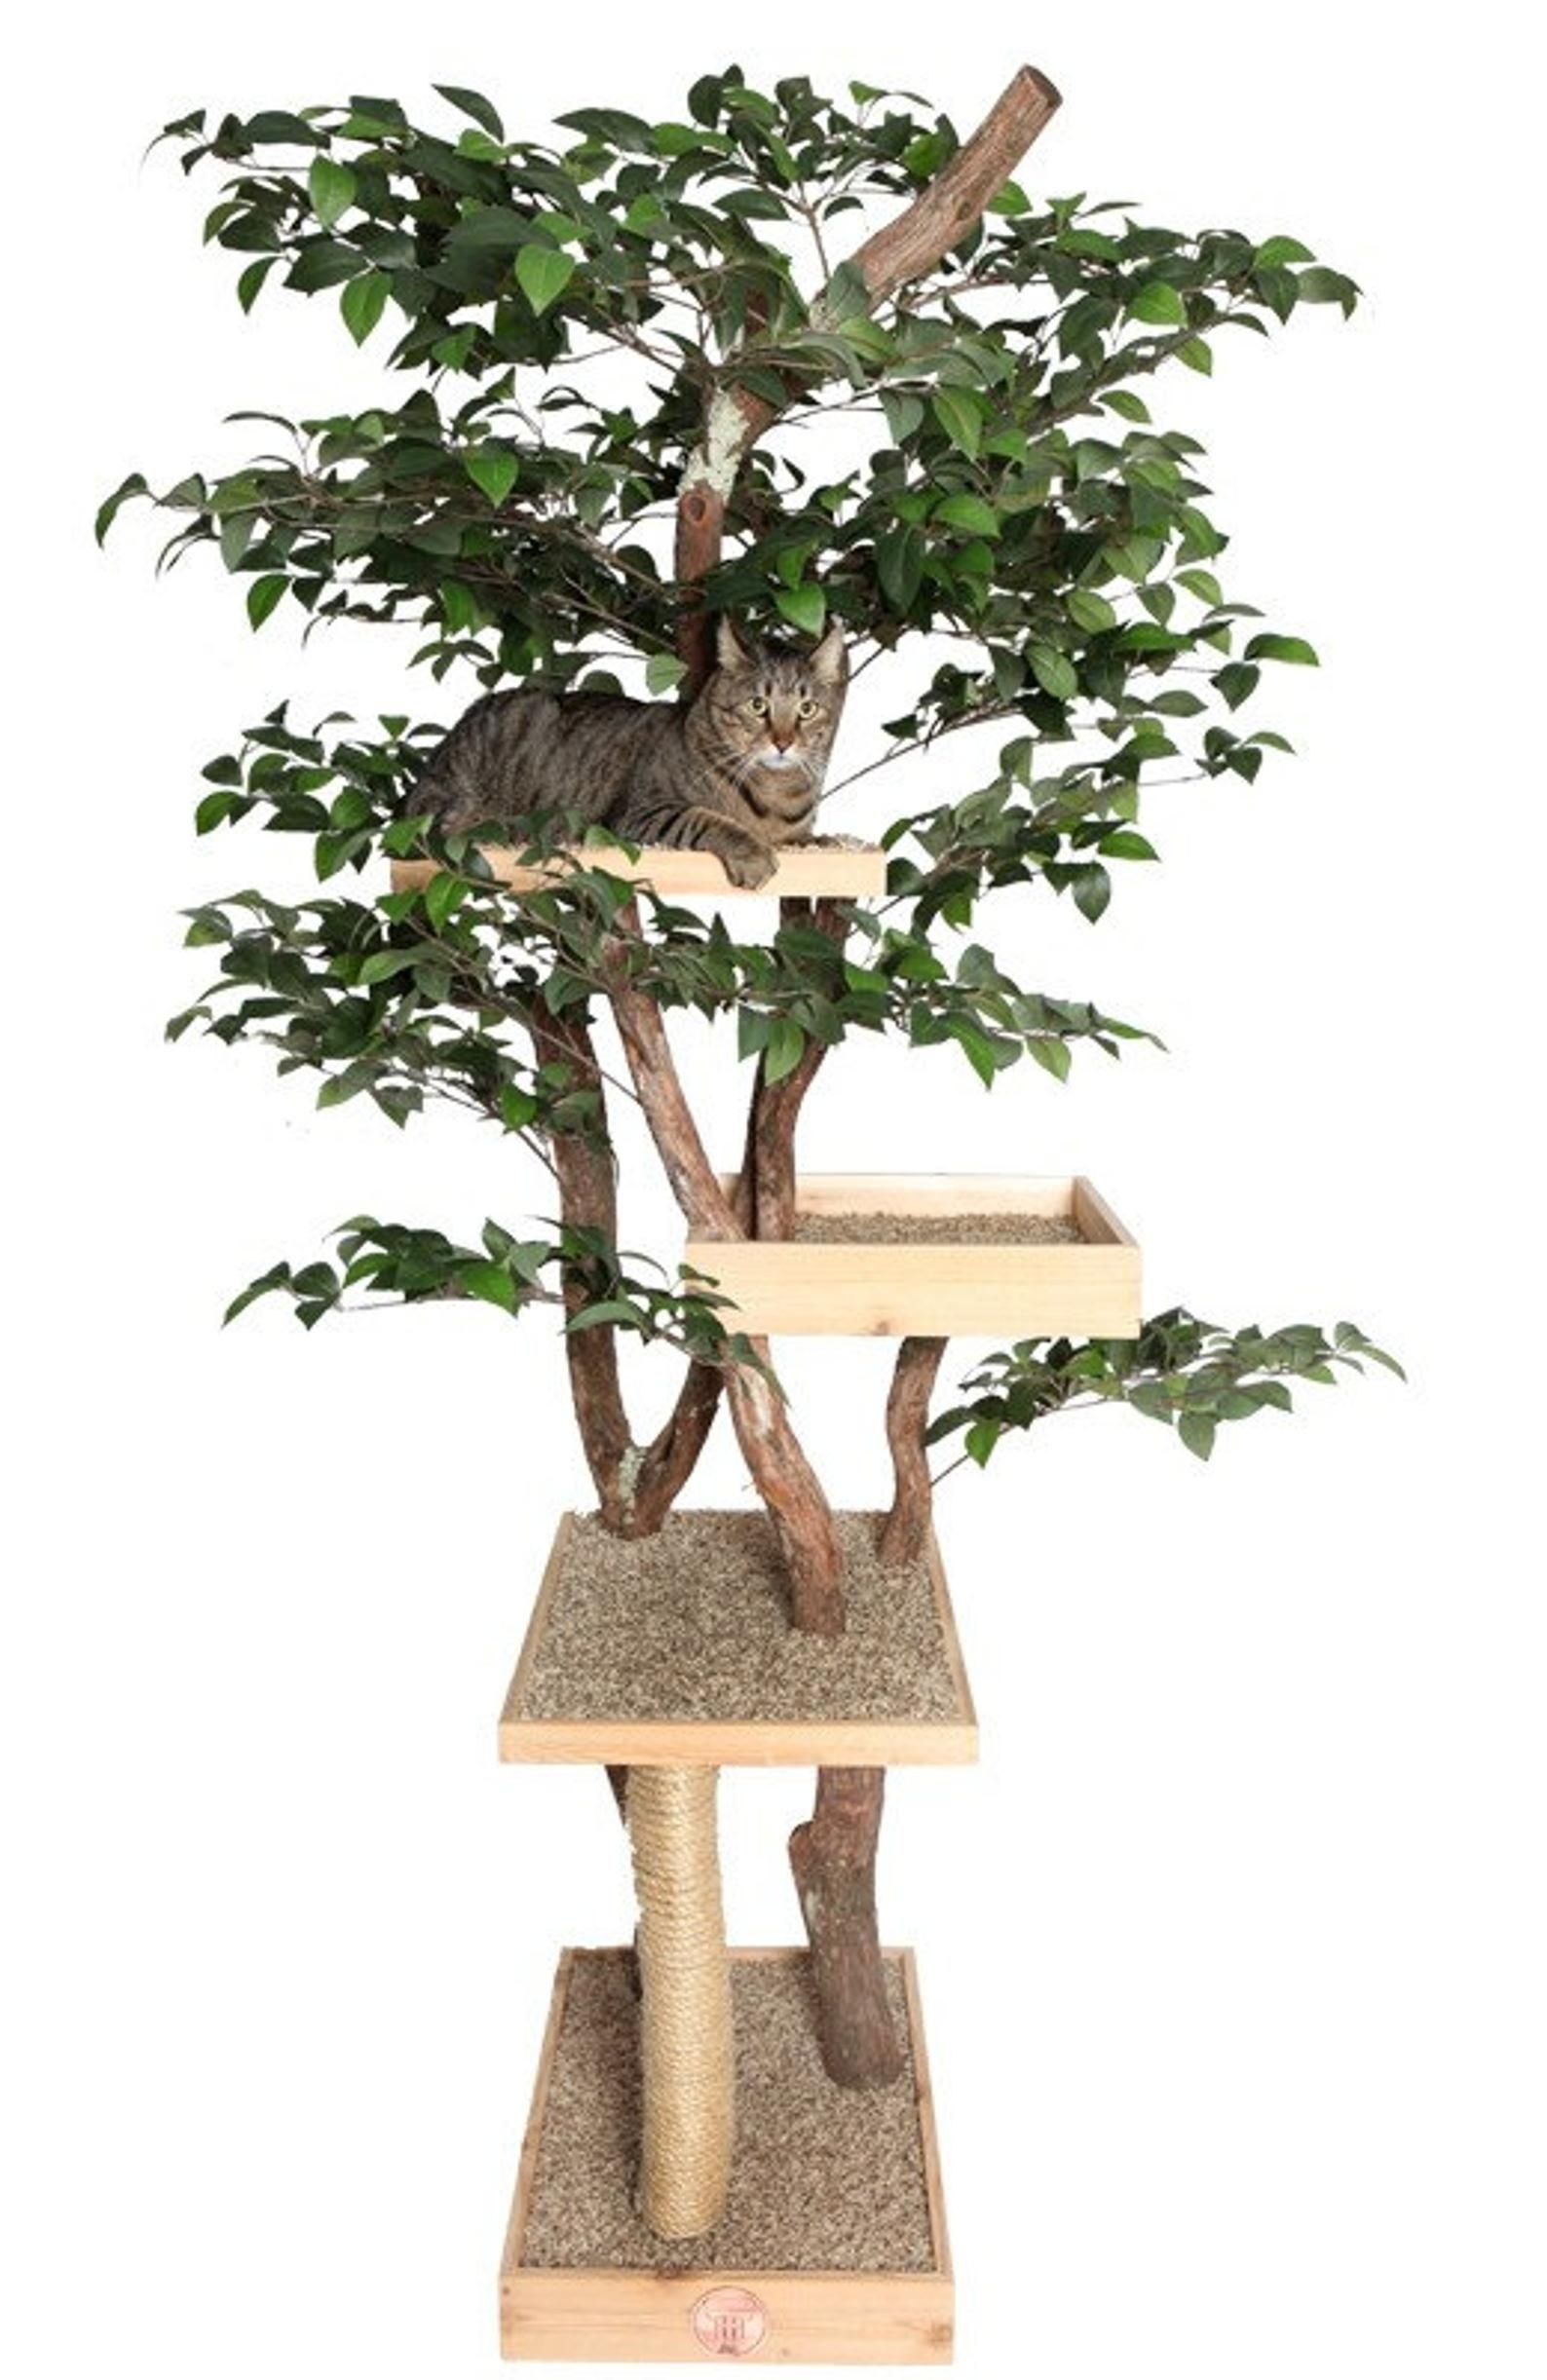 Sycamore cat pet tree house